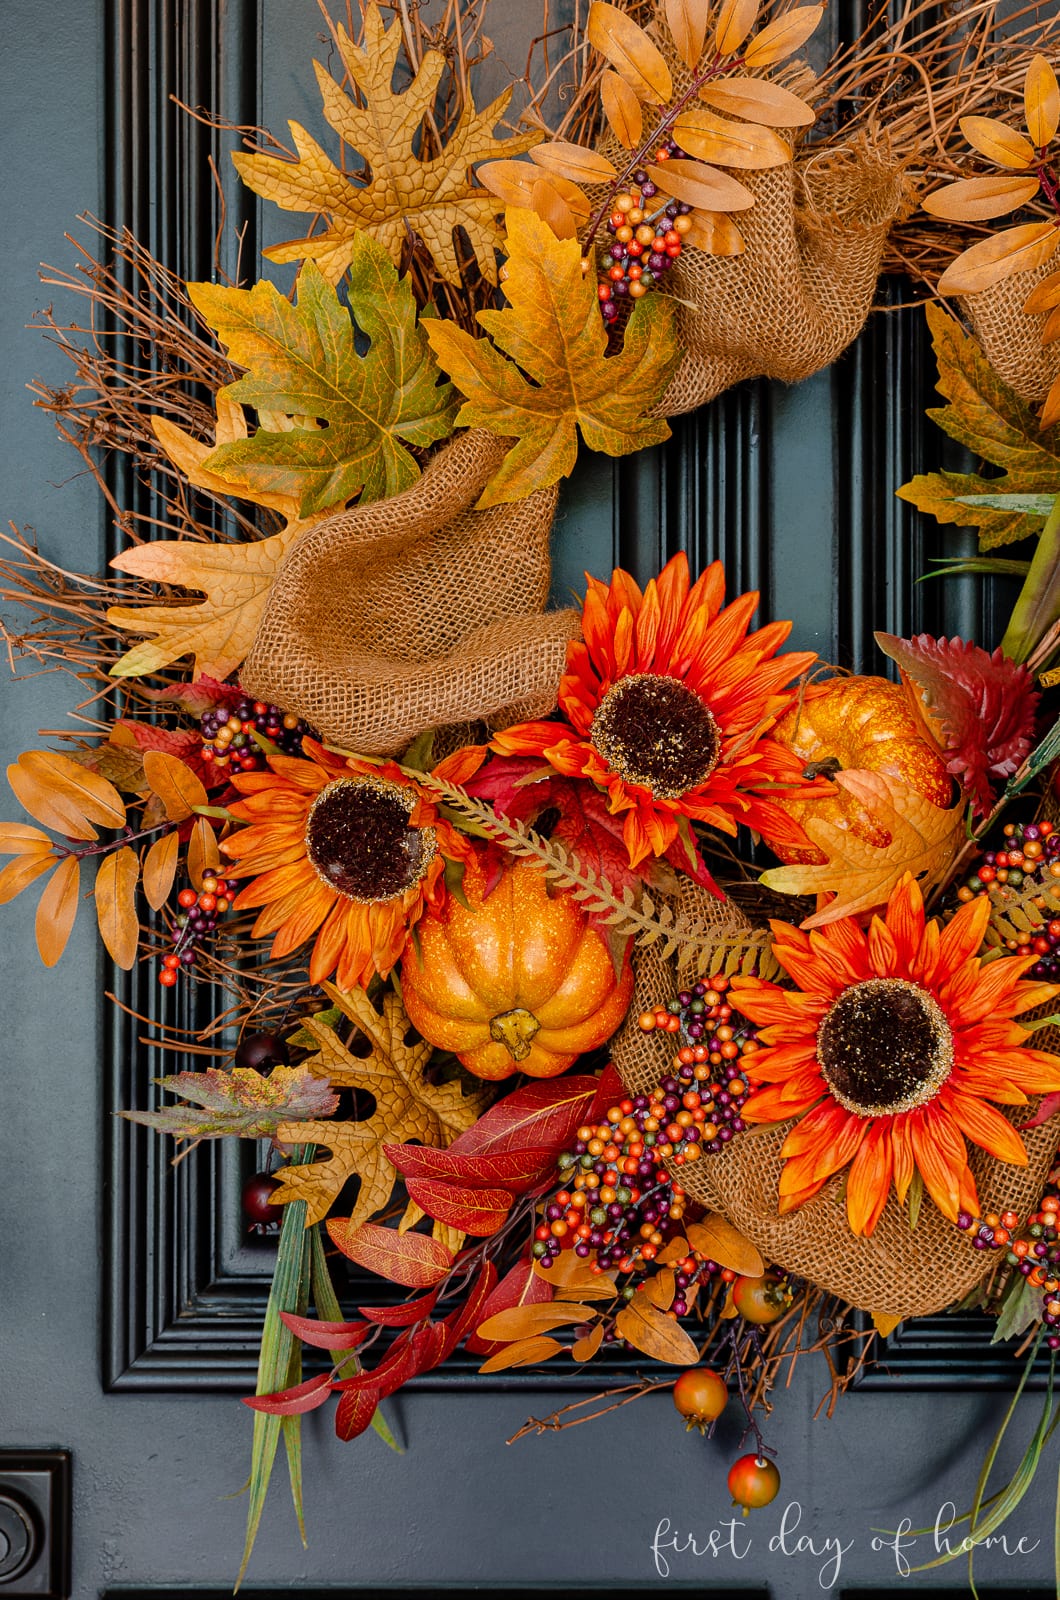 How to Beautifully Decorate a Front Porch for Fall